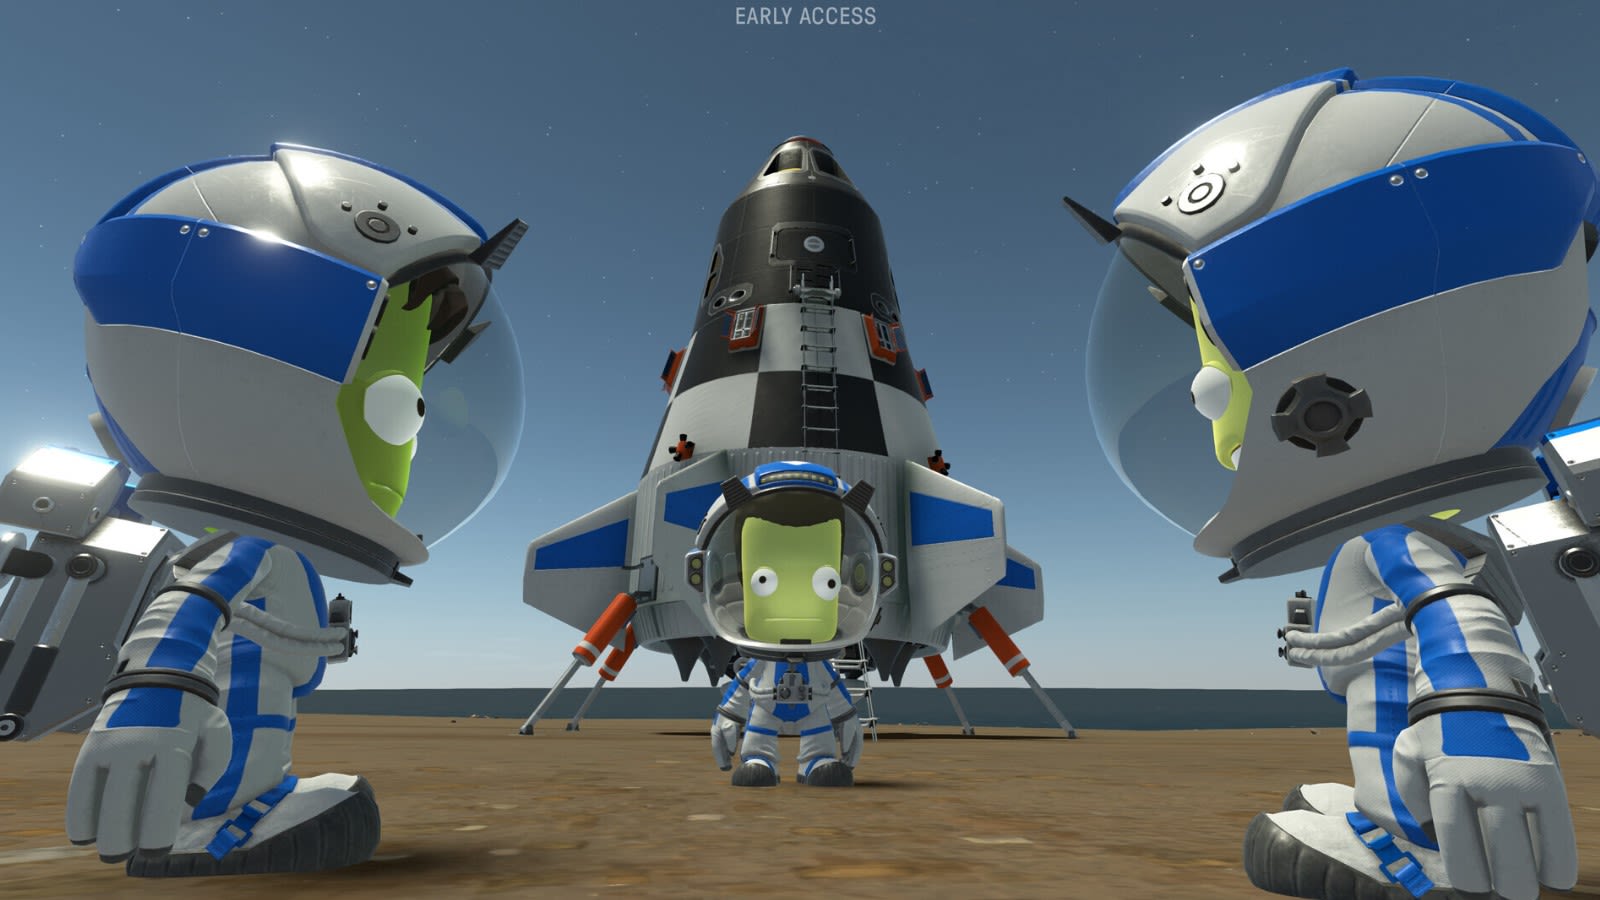 Kerbal Space Program 2 review bombed after Take-Two shuts down developer - Dexerto